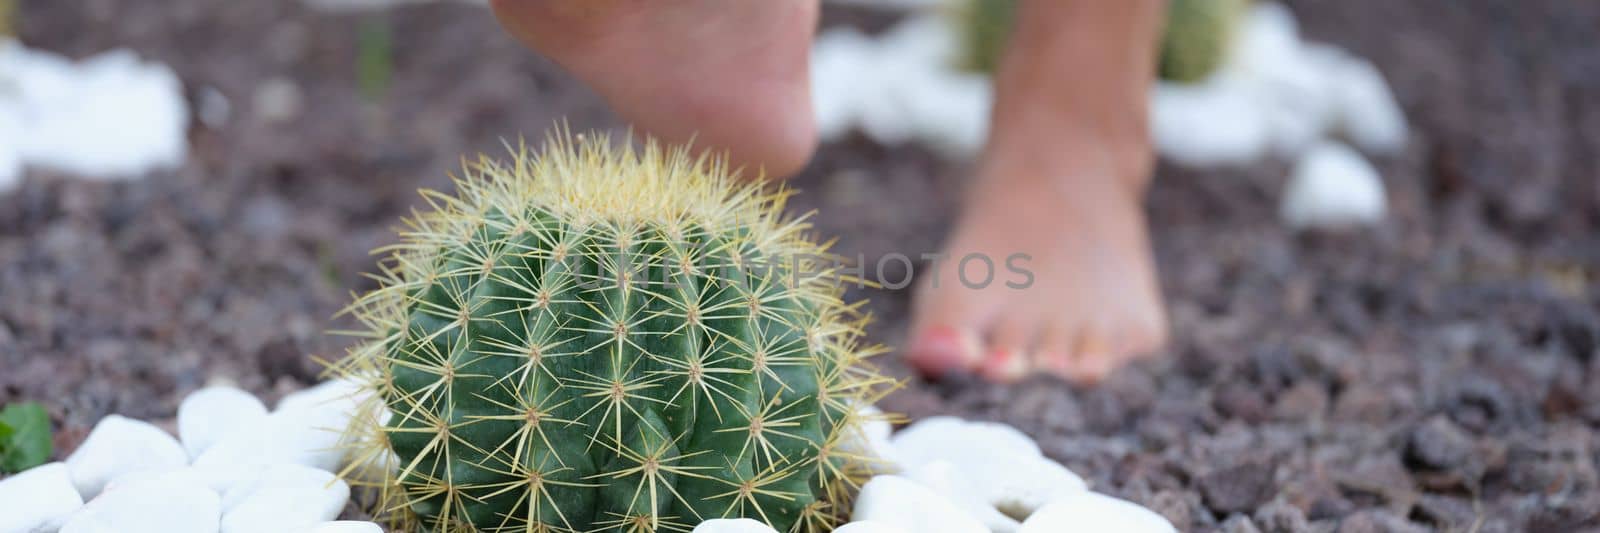 Human leg with painful heel and cactus thorns pierce a woman leg by kuprevich